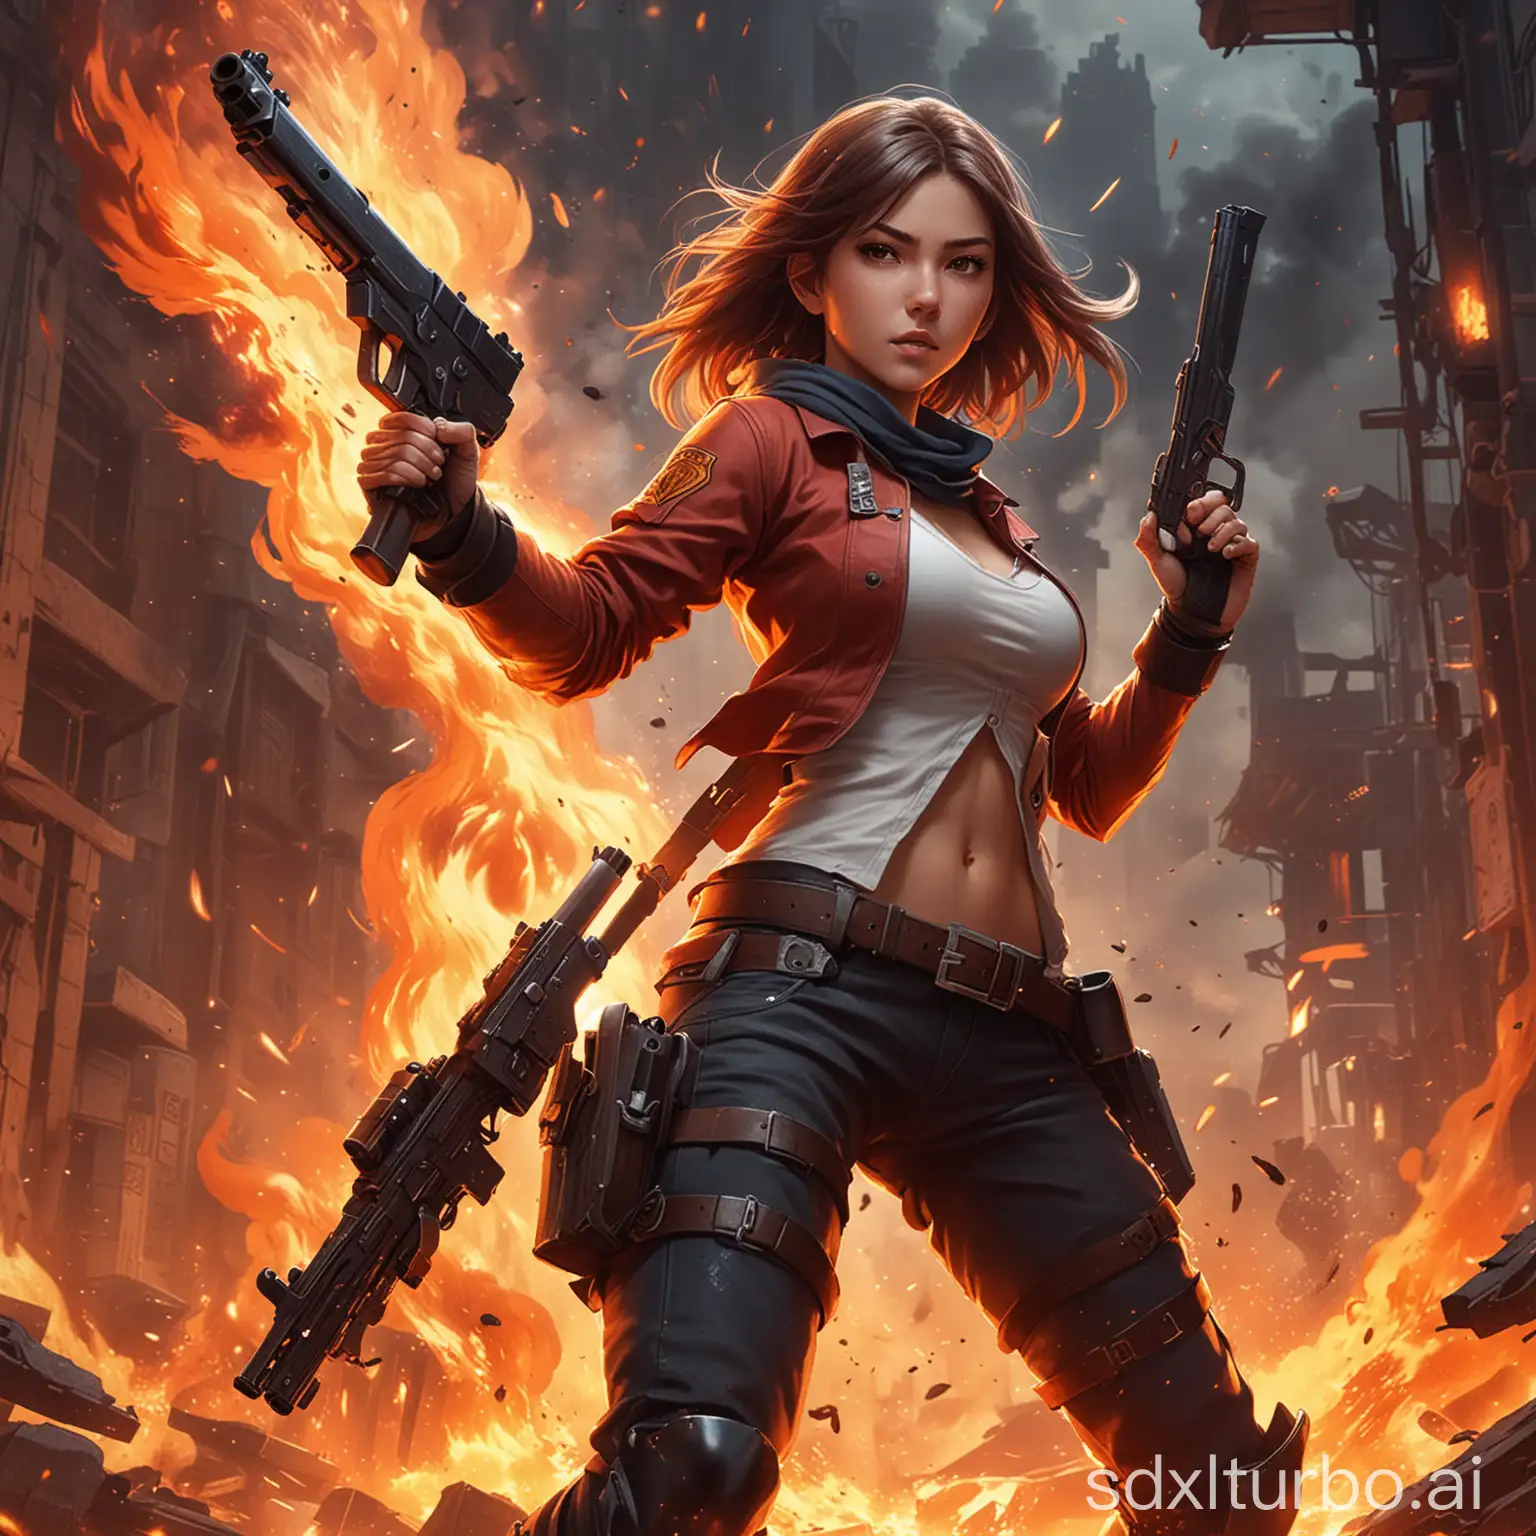 Design a poster for a battle action game in an anime style, depicting a full-body rendered girl with twin pistols, striking a dynamic shooting pose amid blazing fire.